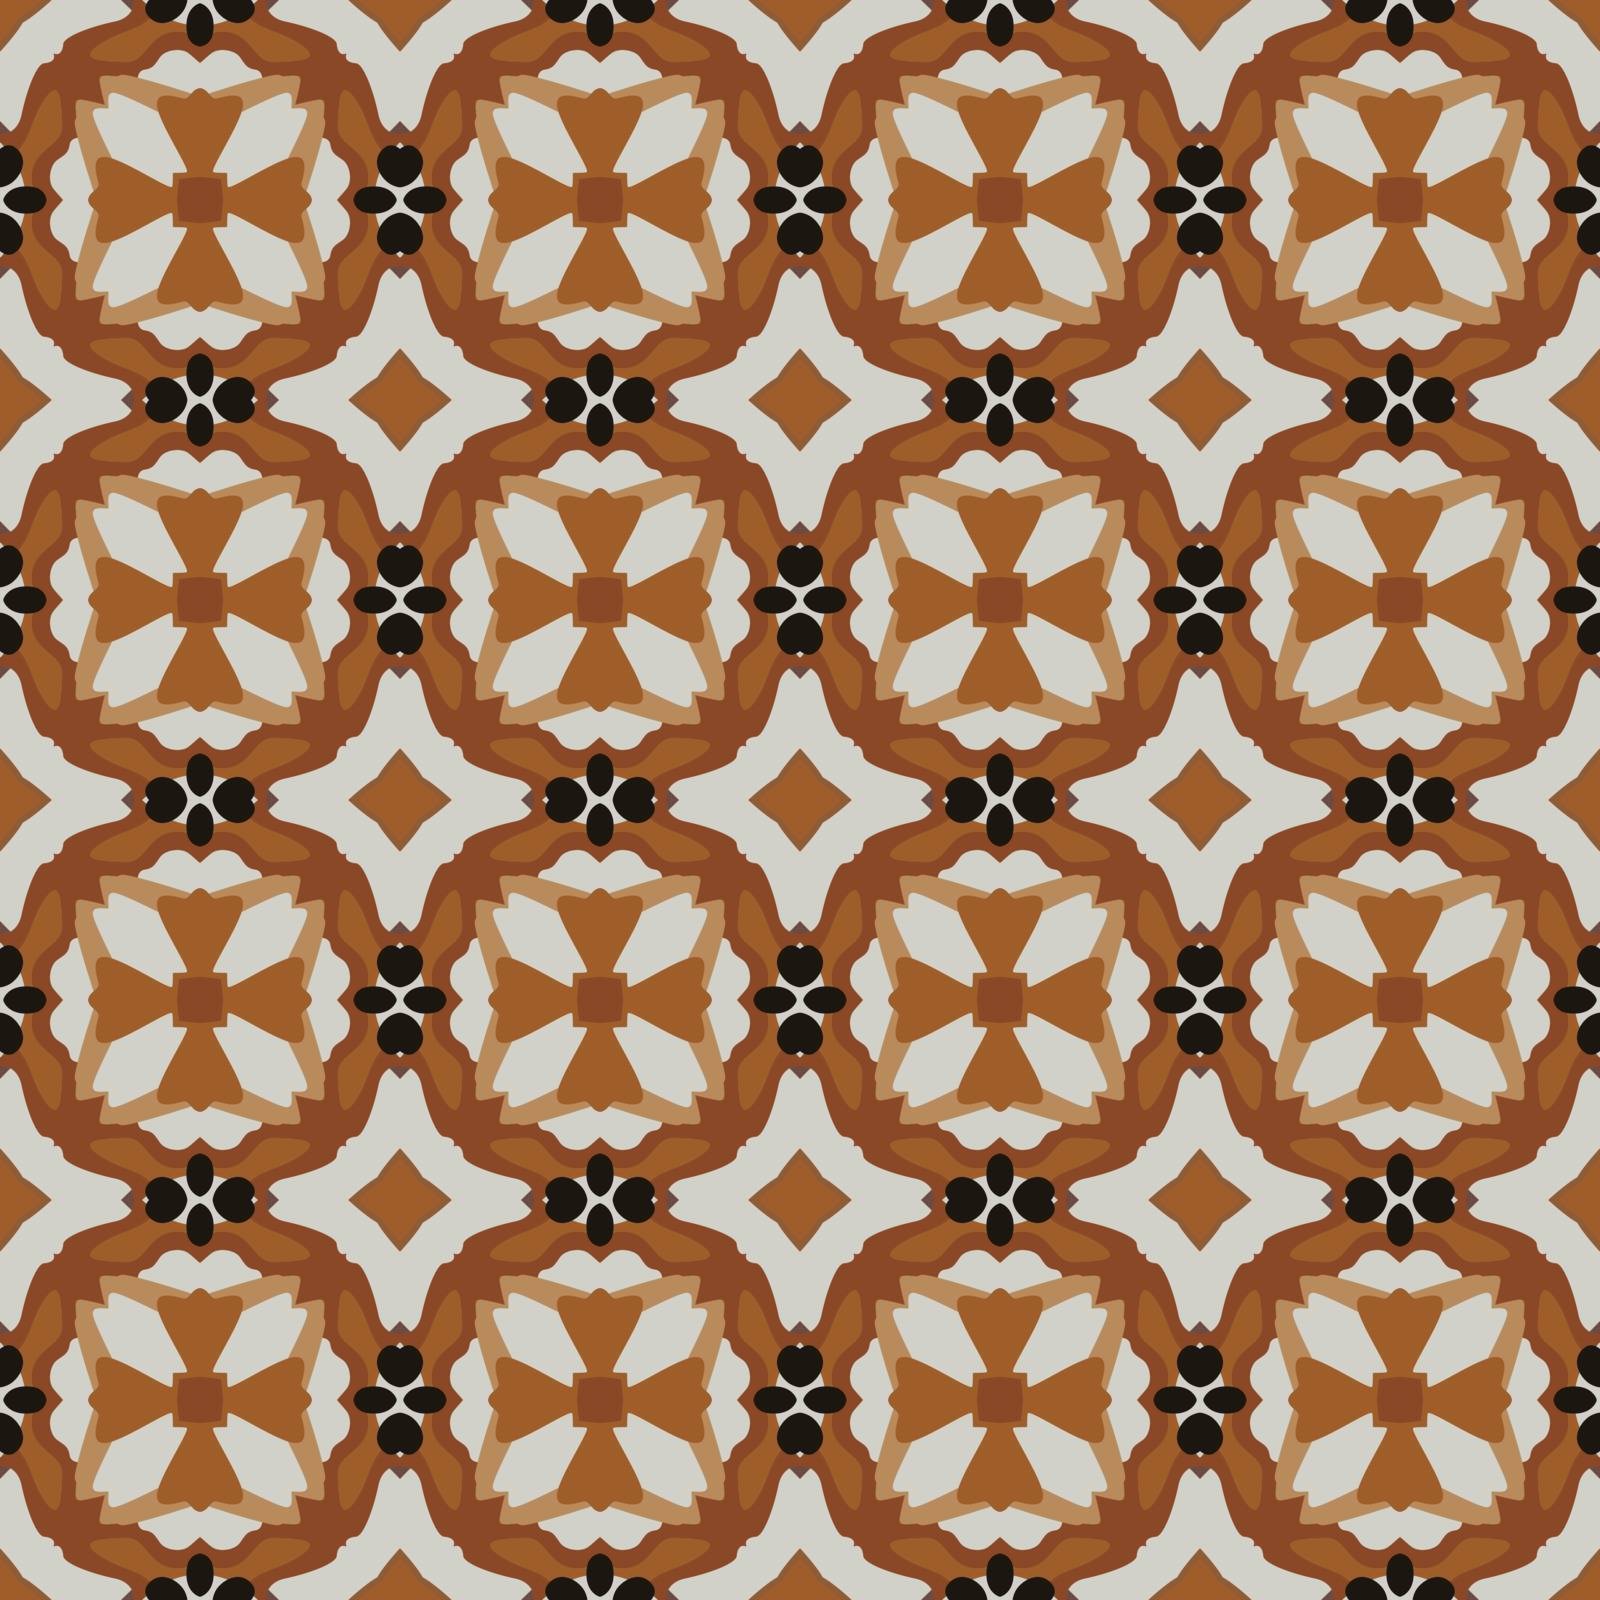 Seamless illustrated pattern made of abstract elements in light gray, shades of brown and black